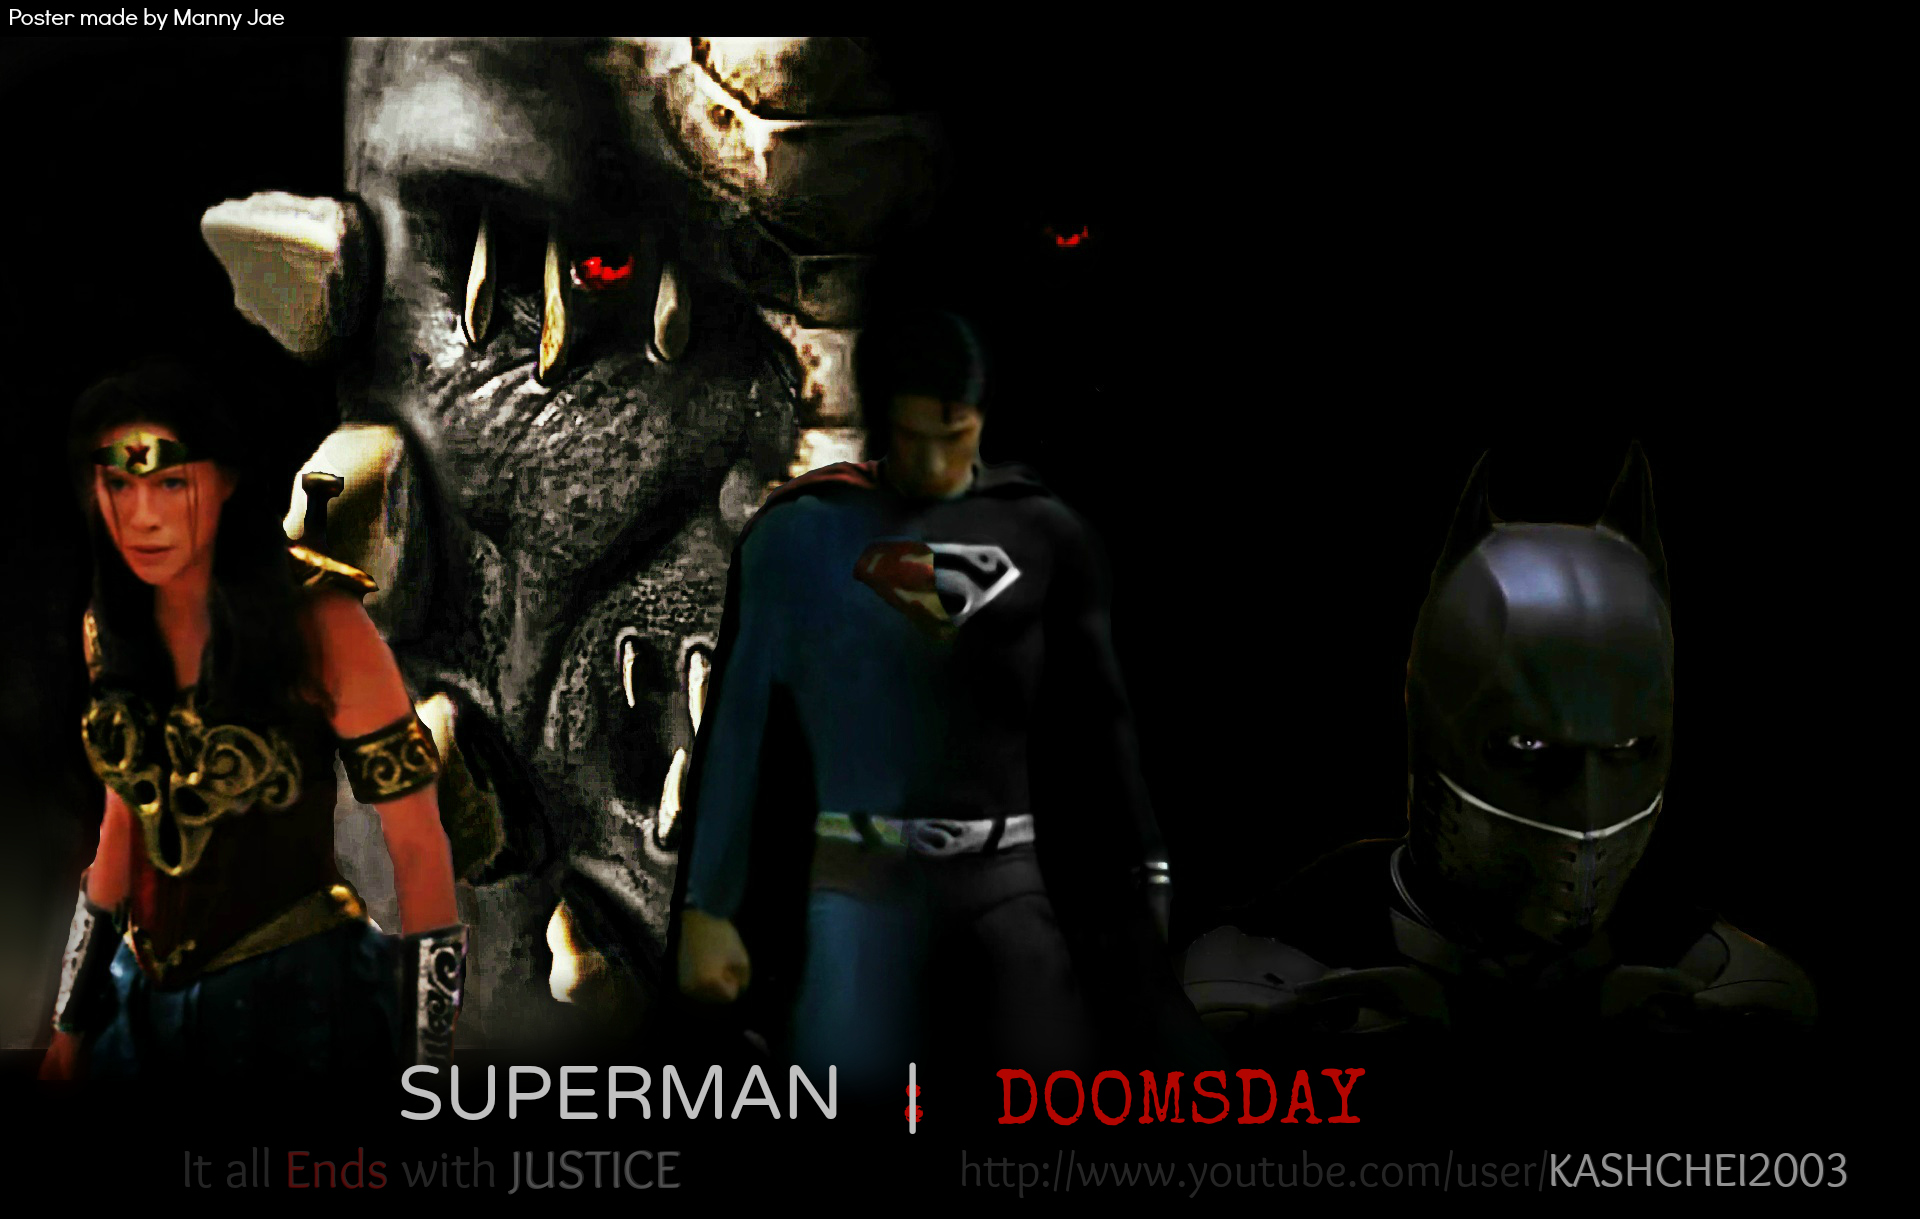 Superman Doomsday Poster By Mannyjae